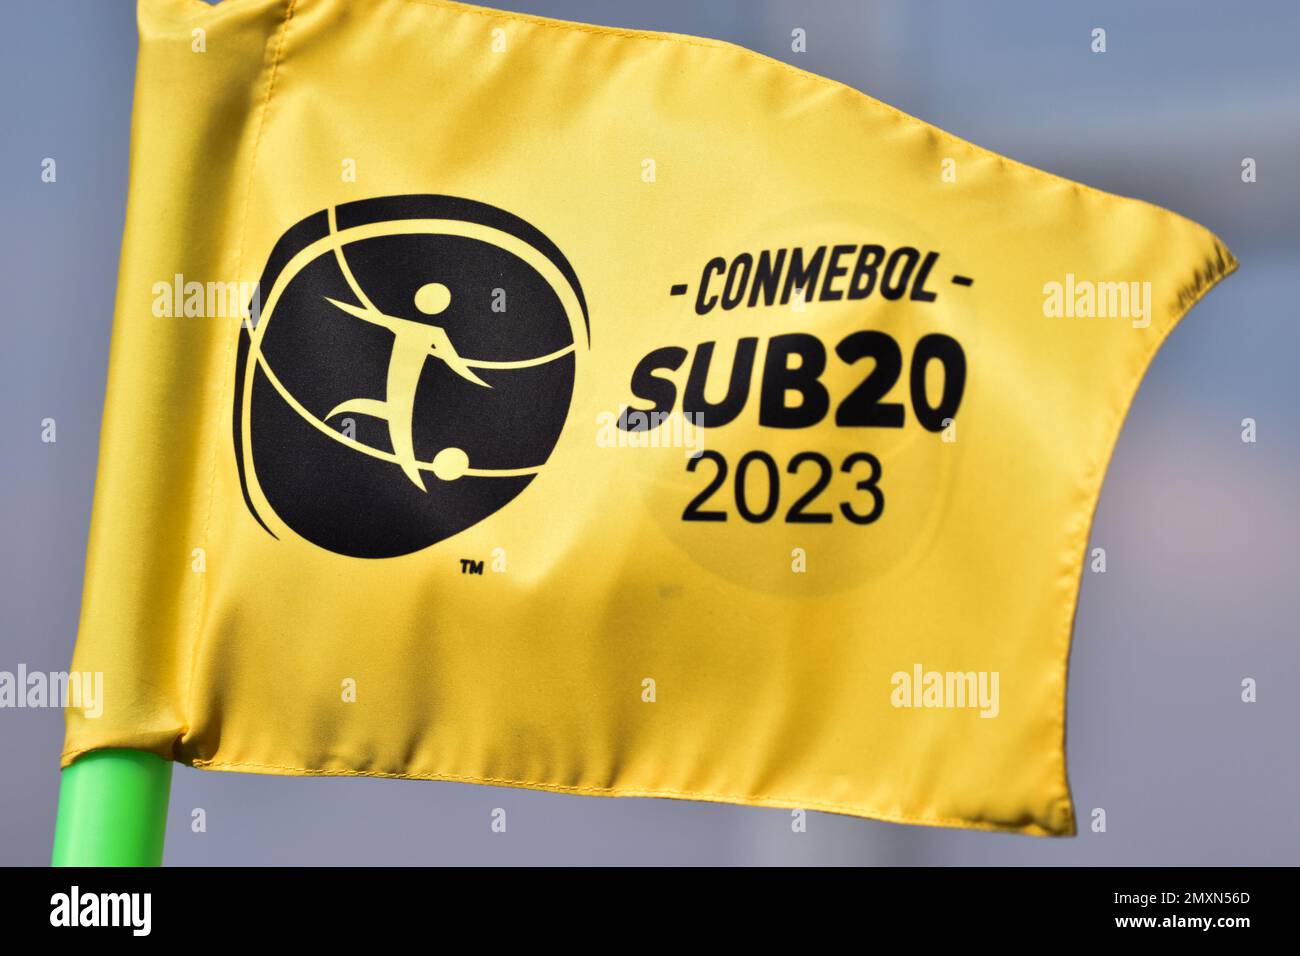 Bogota, Colombia. 03rd Feb, 2023. A corner flag seen with the 'CONMEBOL Sub20 2023' logo during the CONMEBOL South American Tournament match between  Ecuador and Uruguay, in Bogota, Colombia on February 3, 2023. Photo by: Cristian Bayona/Long Visual Press Credit: Long Visual Press/Alamy Live News Stock Photo